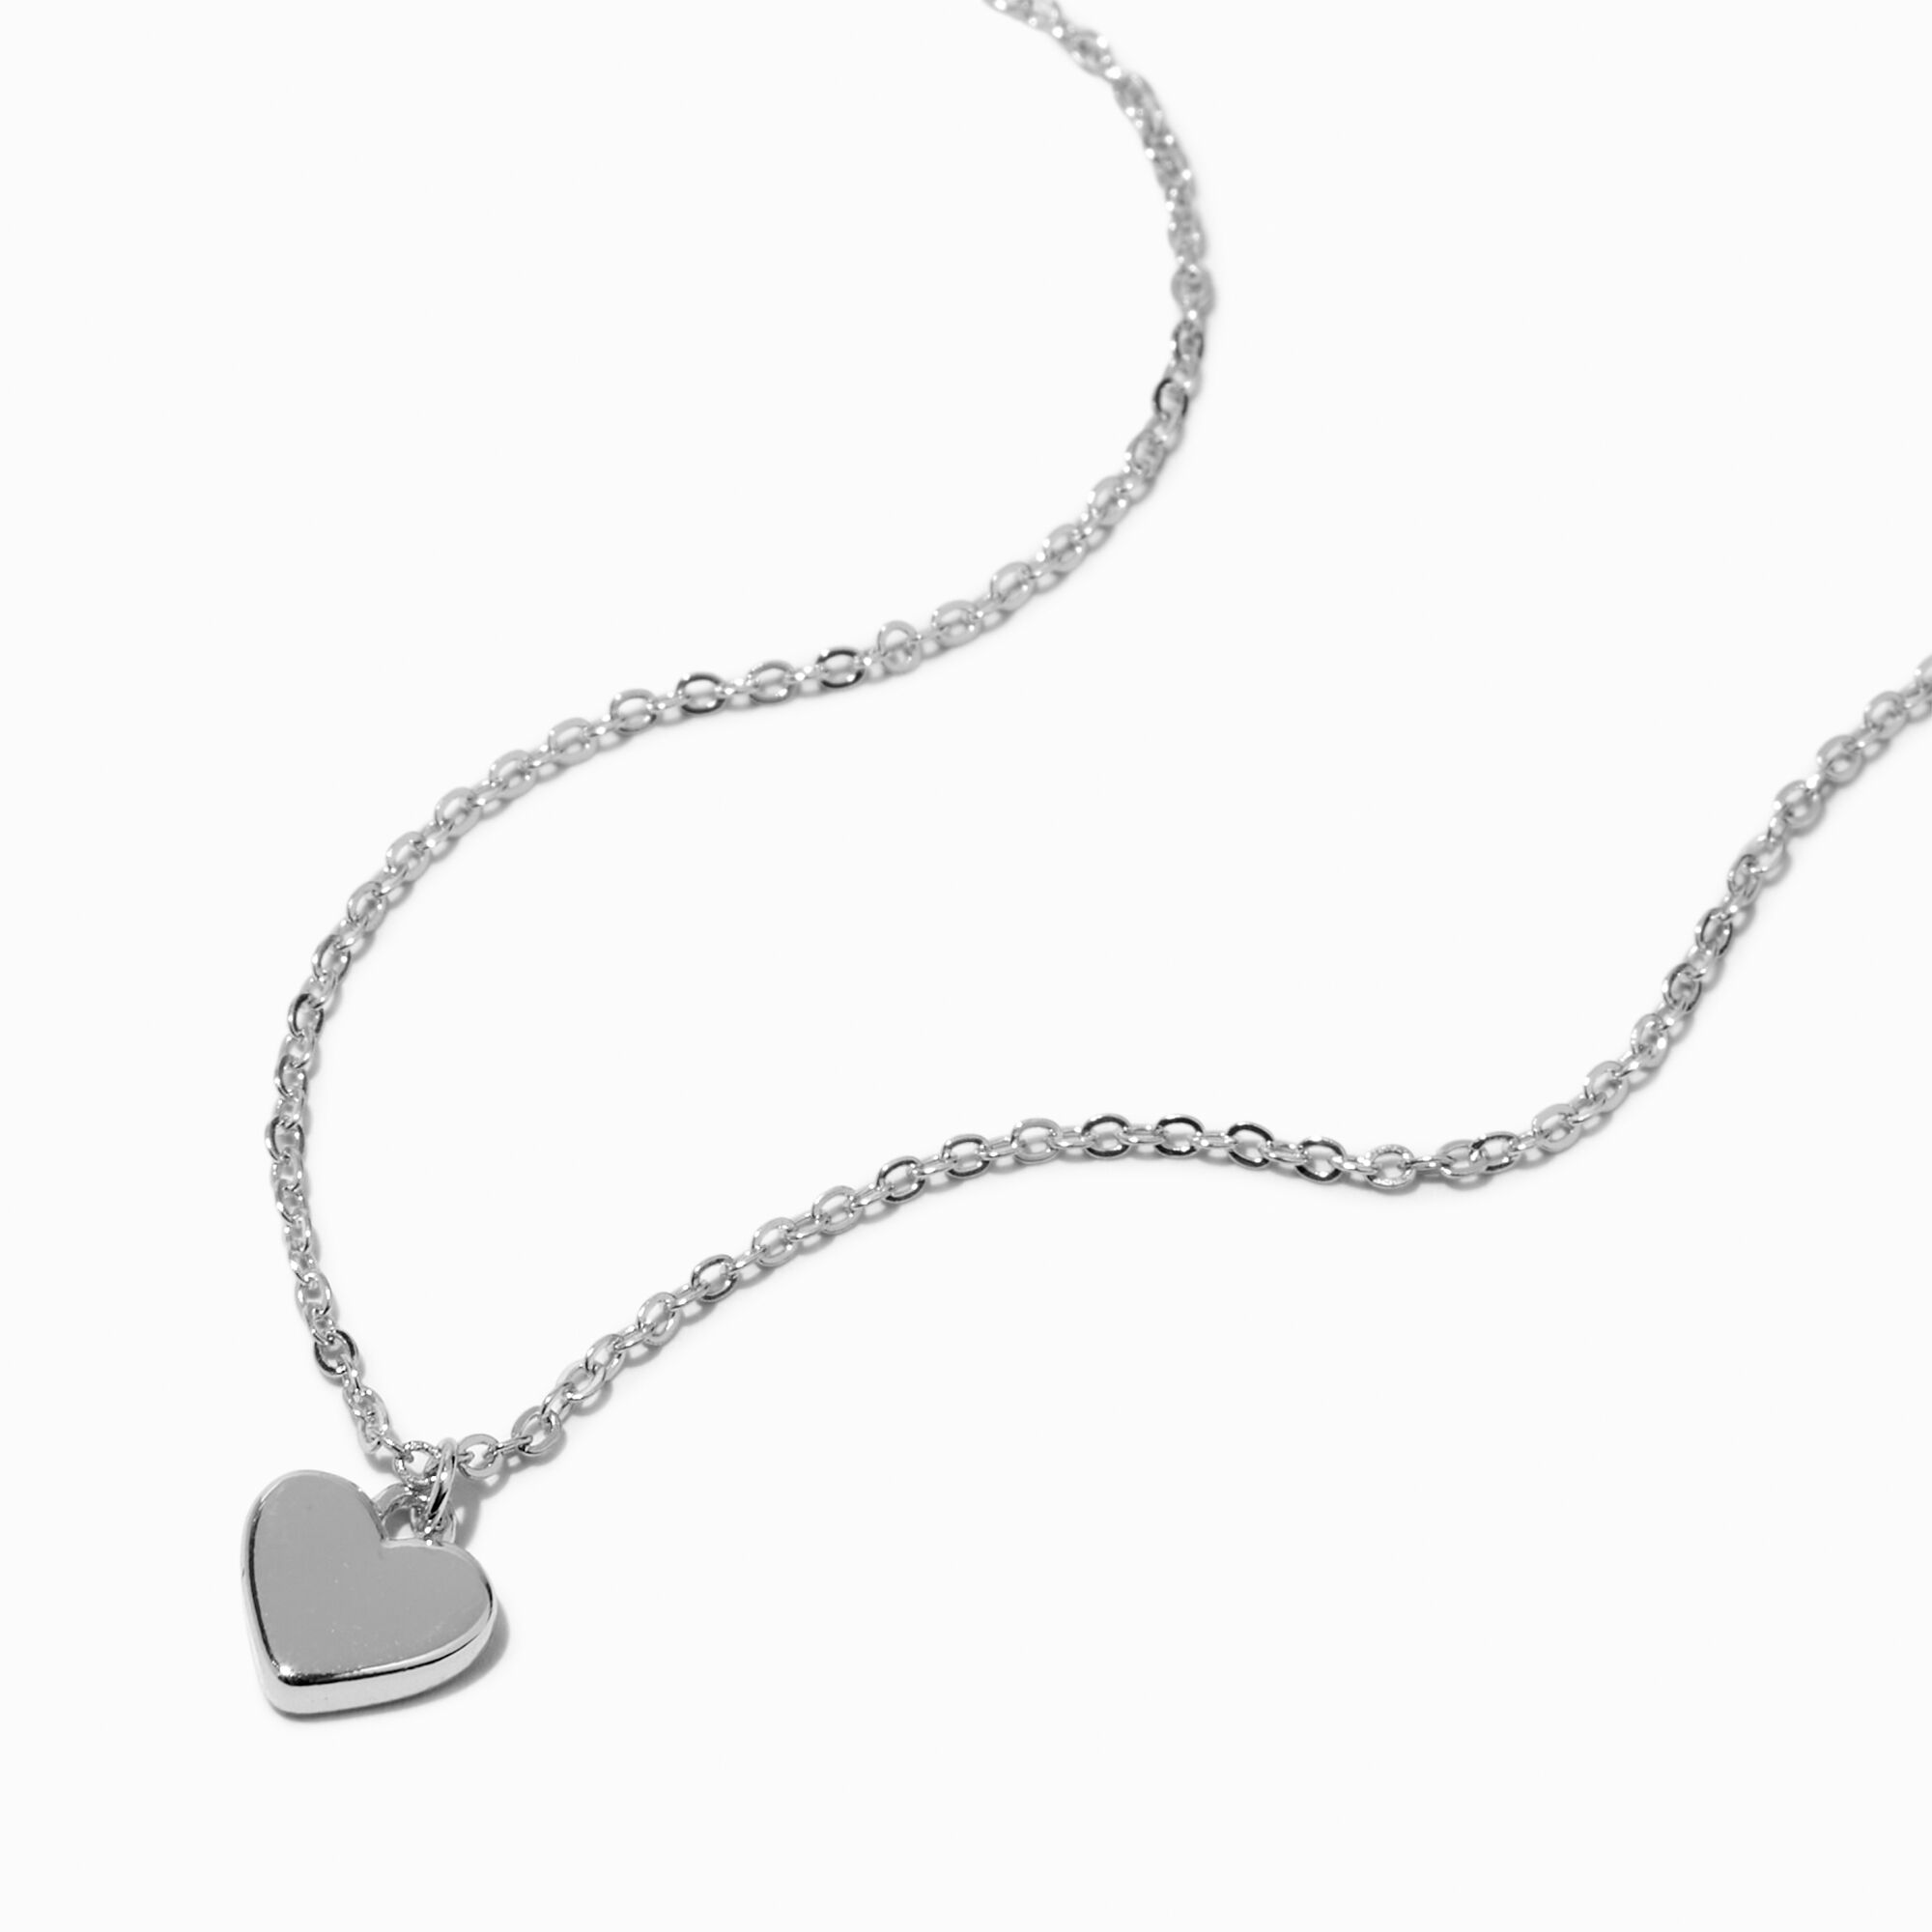 Buy Counting Stars Pendant Necklace In 925 Silver from Shaya by CaratLane